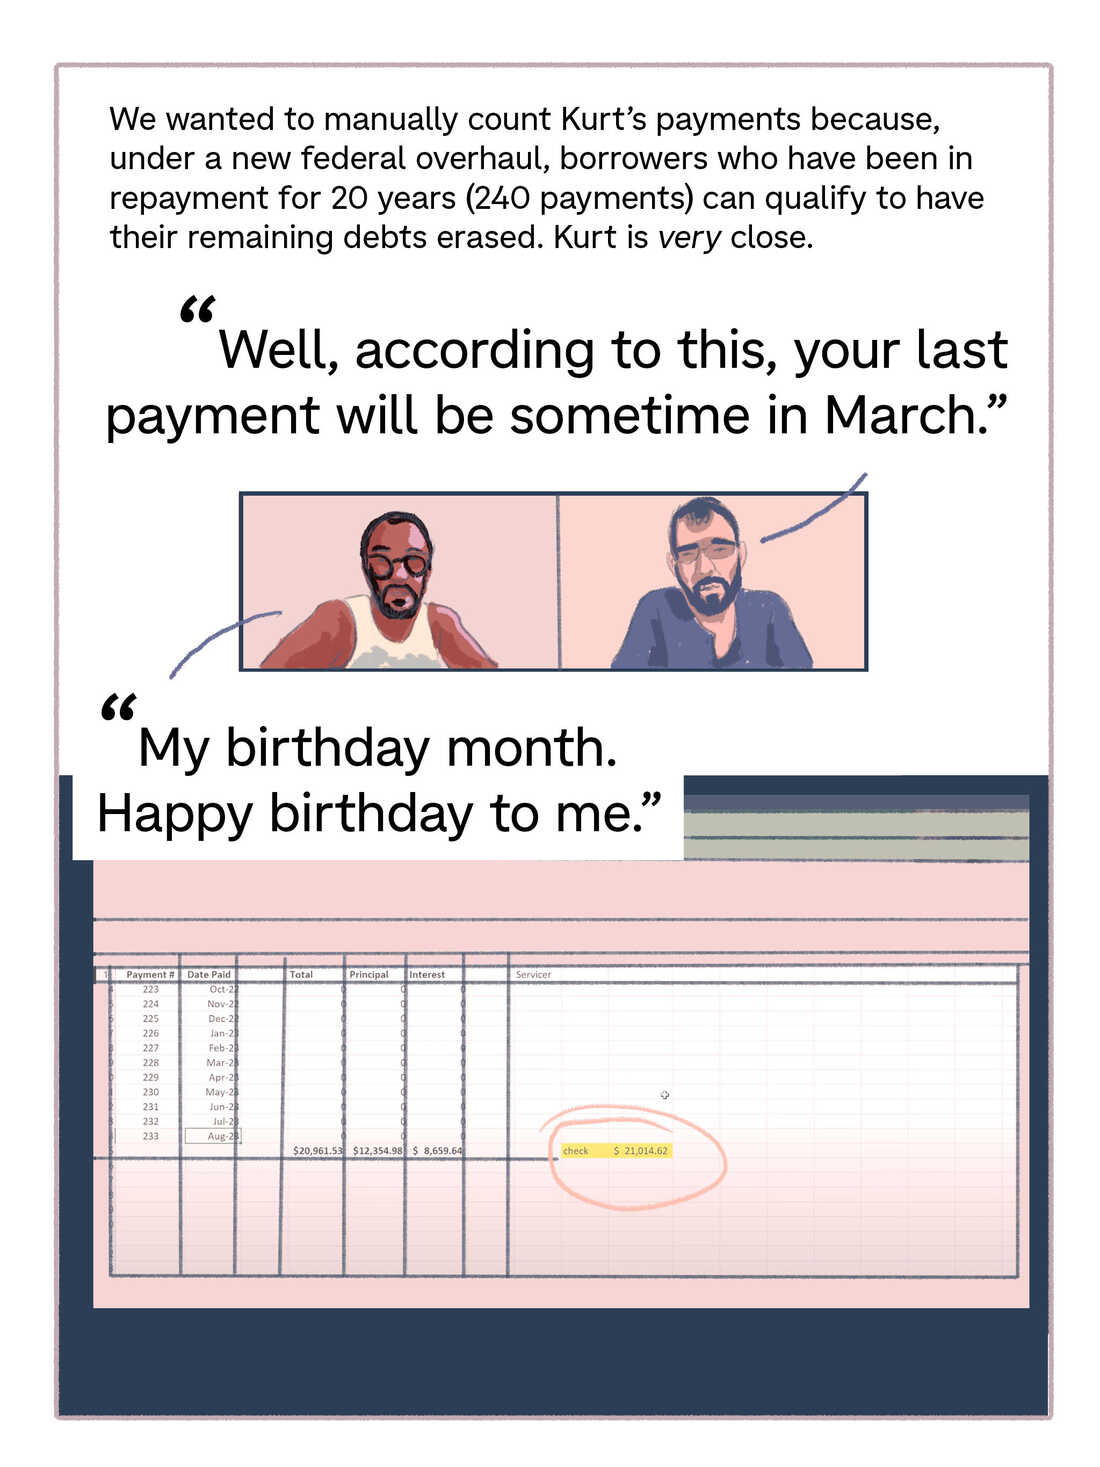 Text: We wanted to manually count Kurt's payments because, under a new federal overhaul, borrowers who have been in repayment for 20 years (240 payments) can qualify to have their remaining debts erased. Kurt is very close. QUOTES: Cory: "Well, according to this, your last payment will be sometime in March."Kurt: "My birthday month. Happy birthday to me."